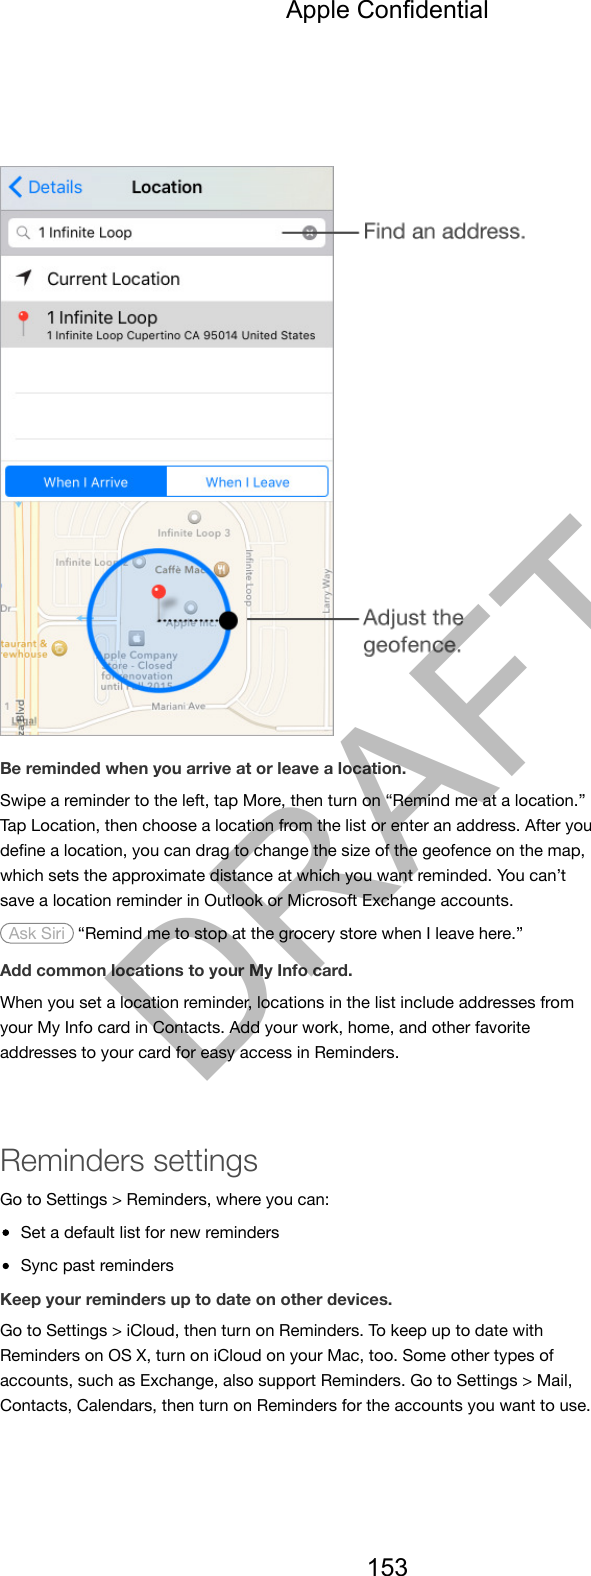 Be reminded when you arrive at or leave a location.Swipe a reminder to the left, tap More, then turn on “Remind me at a location.”Tap Location, then choose a location from the list or enter an address. After youdeﬁne a location, you can drag to change the size of the geofence on the map,which sets the approximate distance at which you want reminded. You can’tsave a location reminder in Outlook or Microsoft Exchange accounts. Ask Siri  “Remind me to stop at the grocery store when I leave here.”Add common locations to your My Info card.When you set a location reminder, locations in the list include addresses fromyour My Info card in Contacts. Add your work, home, and other favoriteaddresses to your card for easy access in Reminders.Reminders settingsGo to Settings &gt; Reminders, where you can:Set a default list for new remindersSync past remindersKeep your reminders up to date on other devices.Go to Settings &gt; iCloud, then turn on Reminders. To keep up to date withReminders on OS X, turn on iCloud on your Mac, too. Some other types ofaccounts, such as Exchange, also support Reminders. Go to Settings &gt; Mail,Contacts, Calendars, then turn on Reminders for the accounts you want to use.Apple Confidential153DRAFT